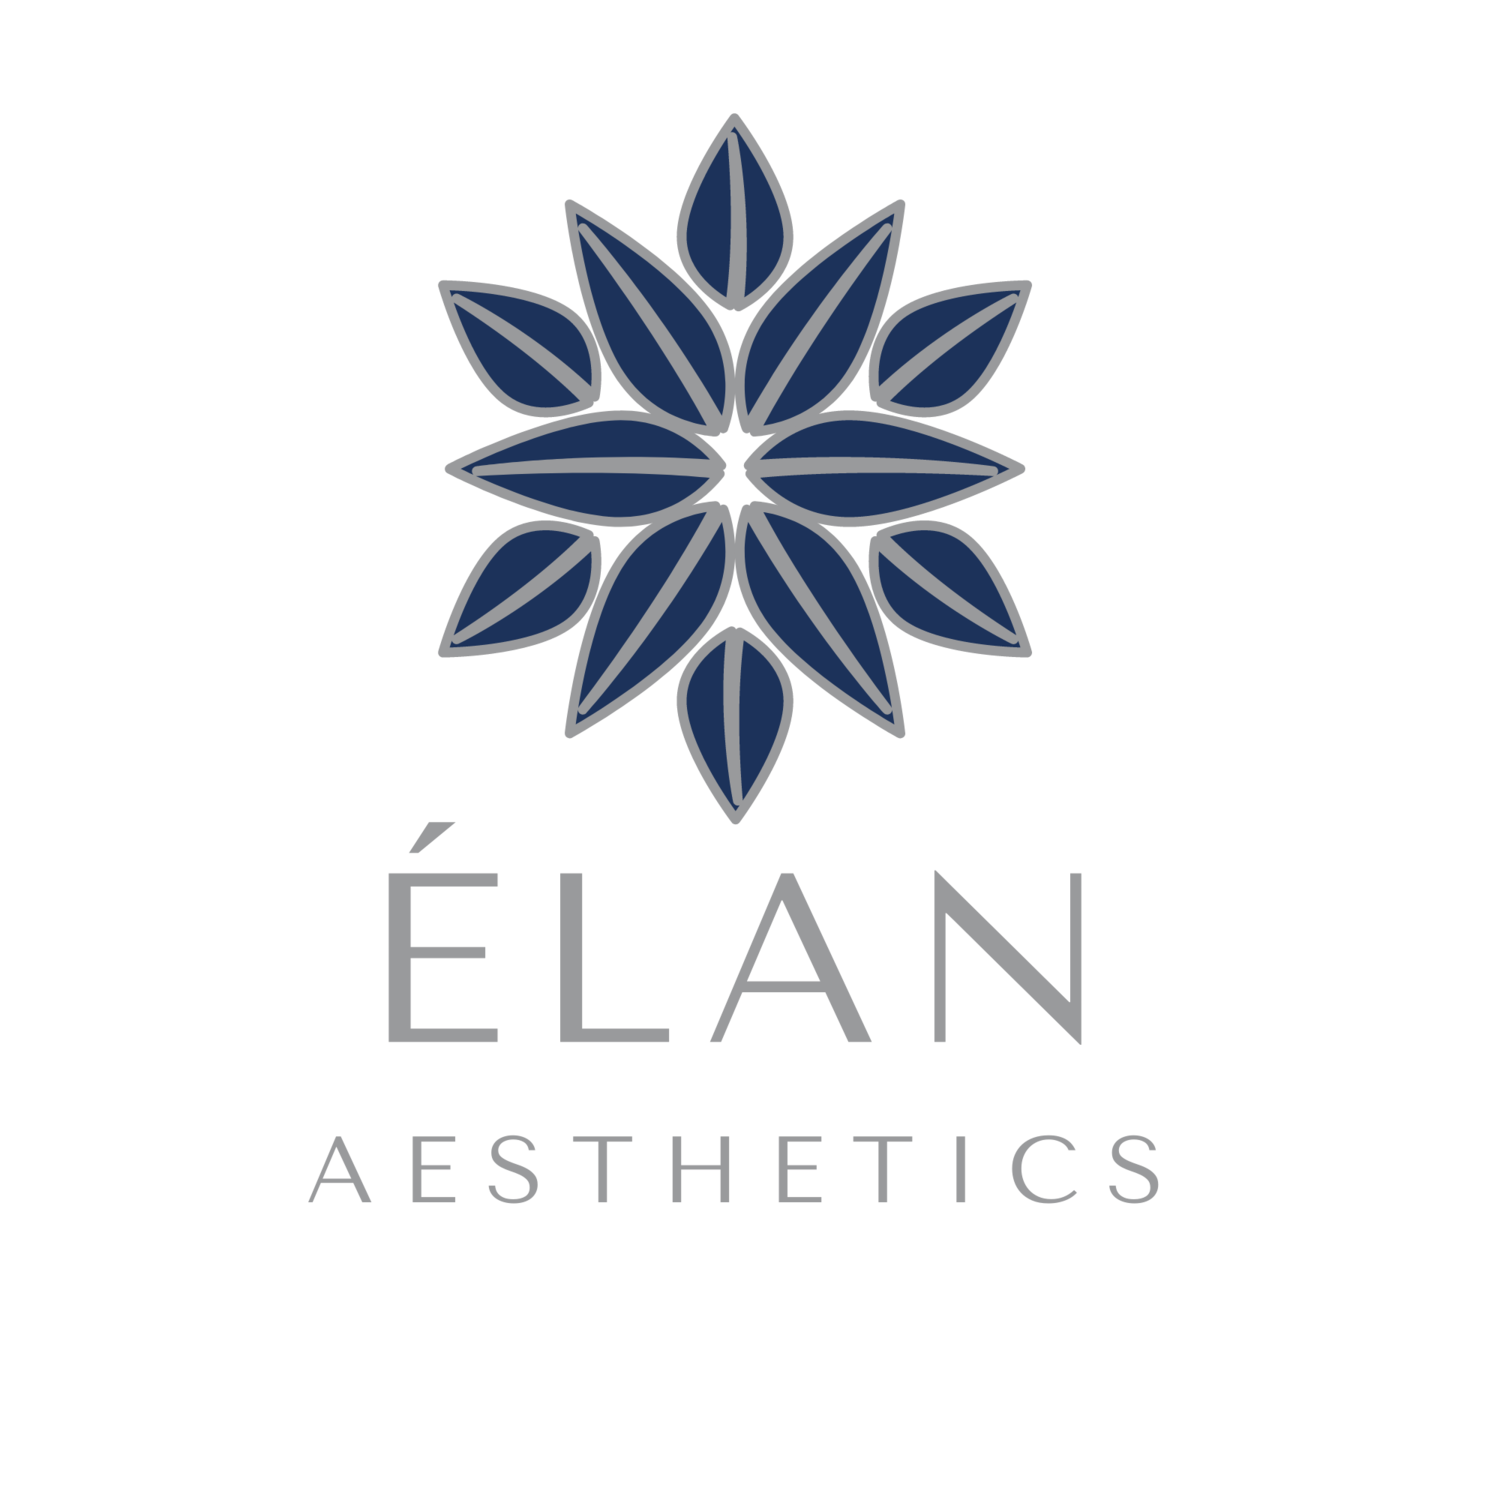 Élan Aesthetics - A boutique aesthetic clinic in Wokingham, Berkshire,  specialising in non-surgical treatments as well as the development of leading, results-driven aesthetic products and advanced skin care techniques.